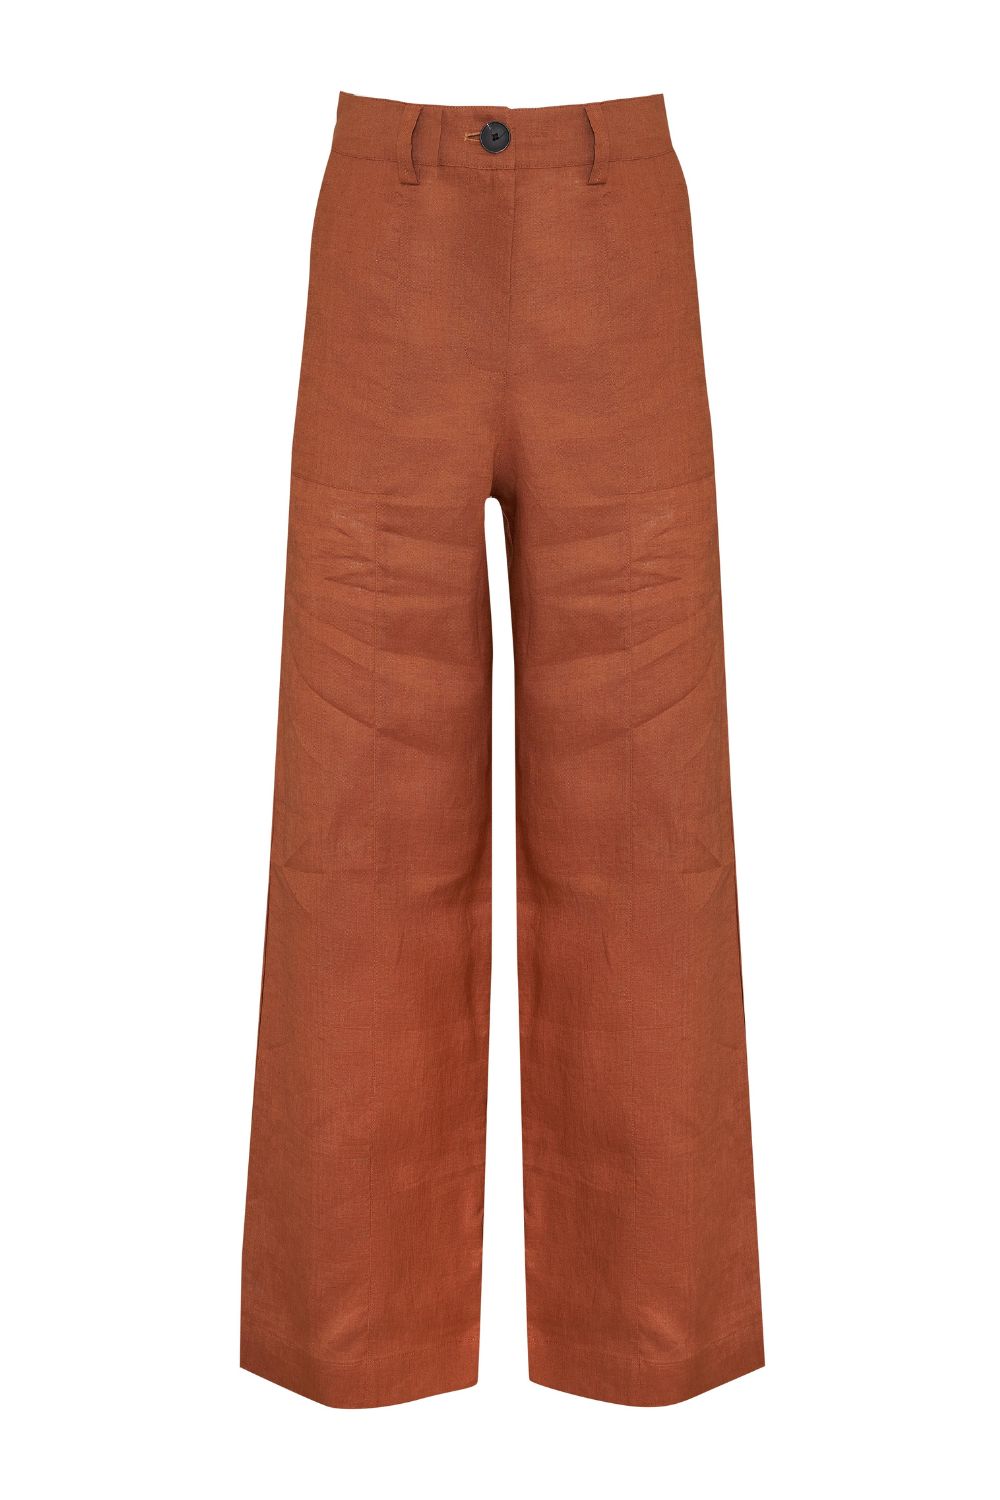 signify pant - chestnut